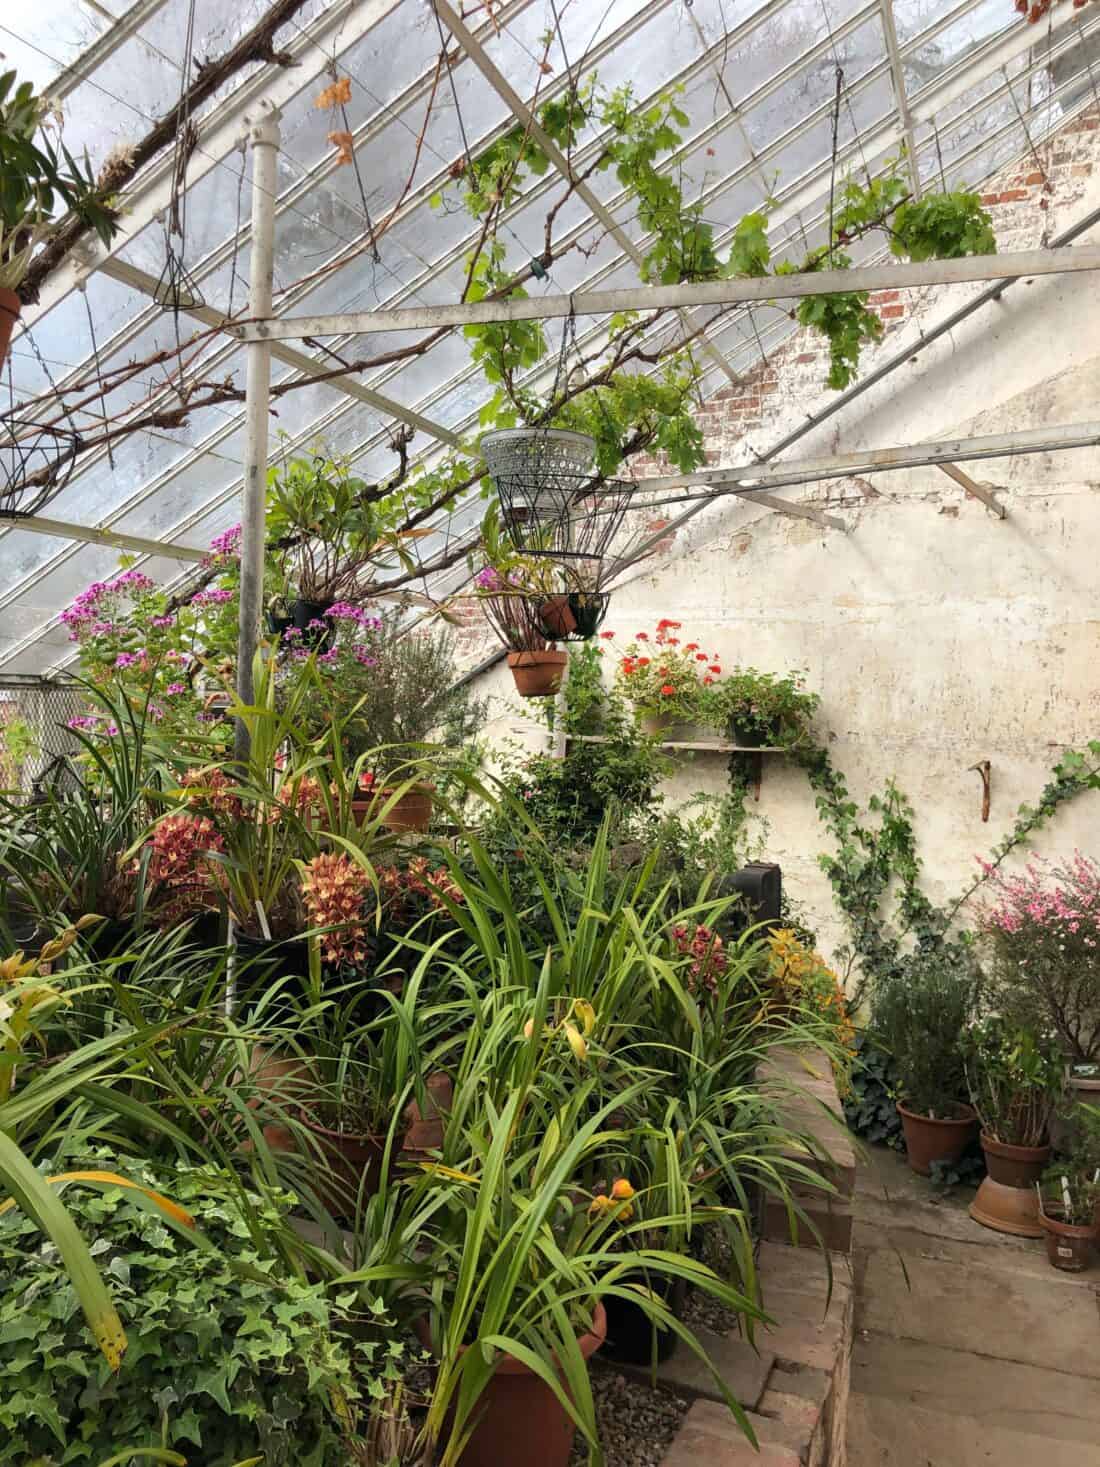 A greenhouse interior at the Boston Garden Center with a variety of potted plants and flowers. Green leafy plants and vibrant orchids fill the space, with some hanging from the ceiling. The greenhouse has a glass roof and rustic white walls, supported by beams.